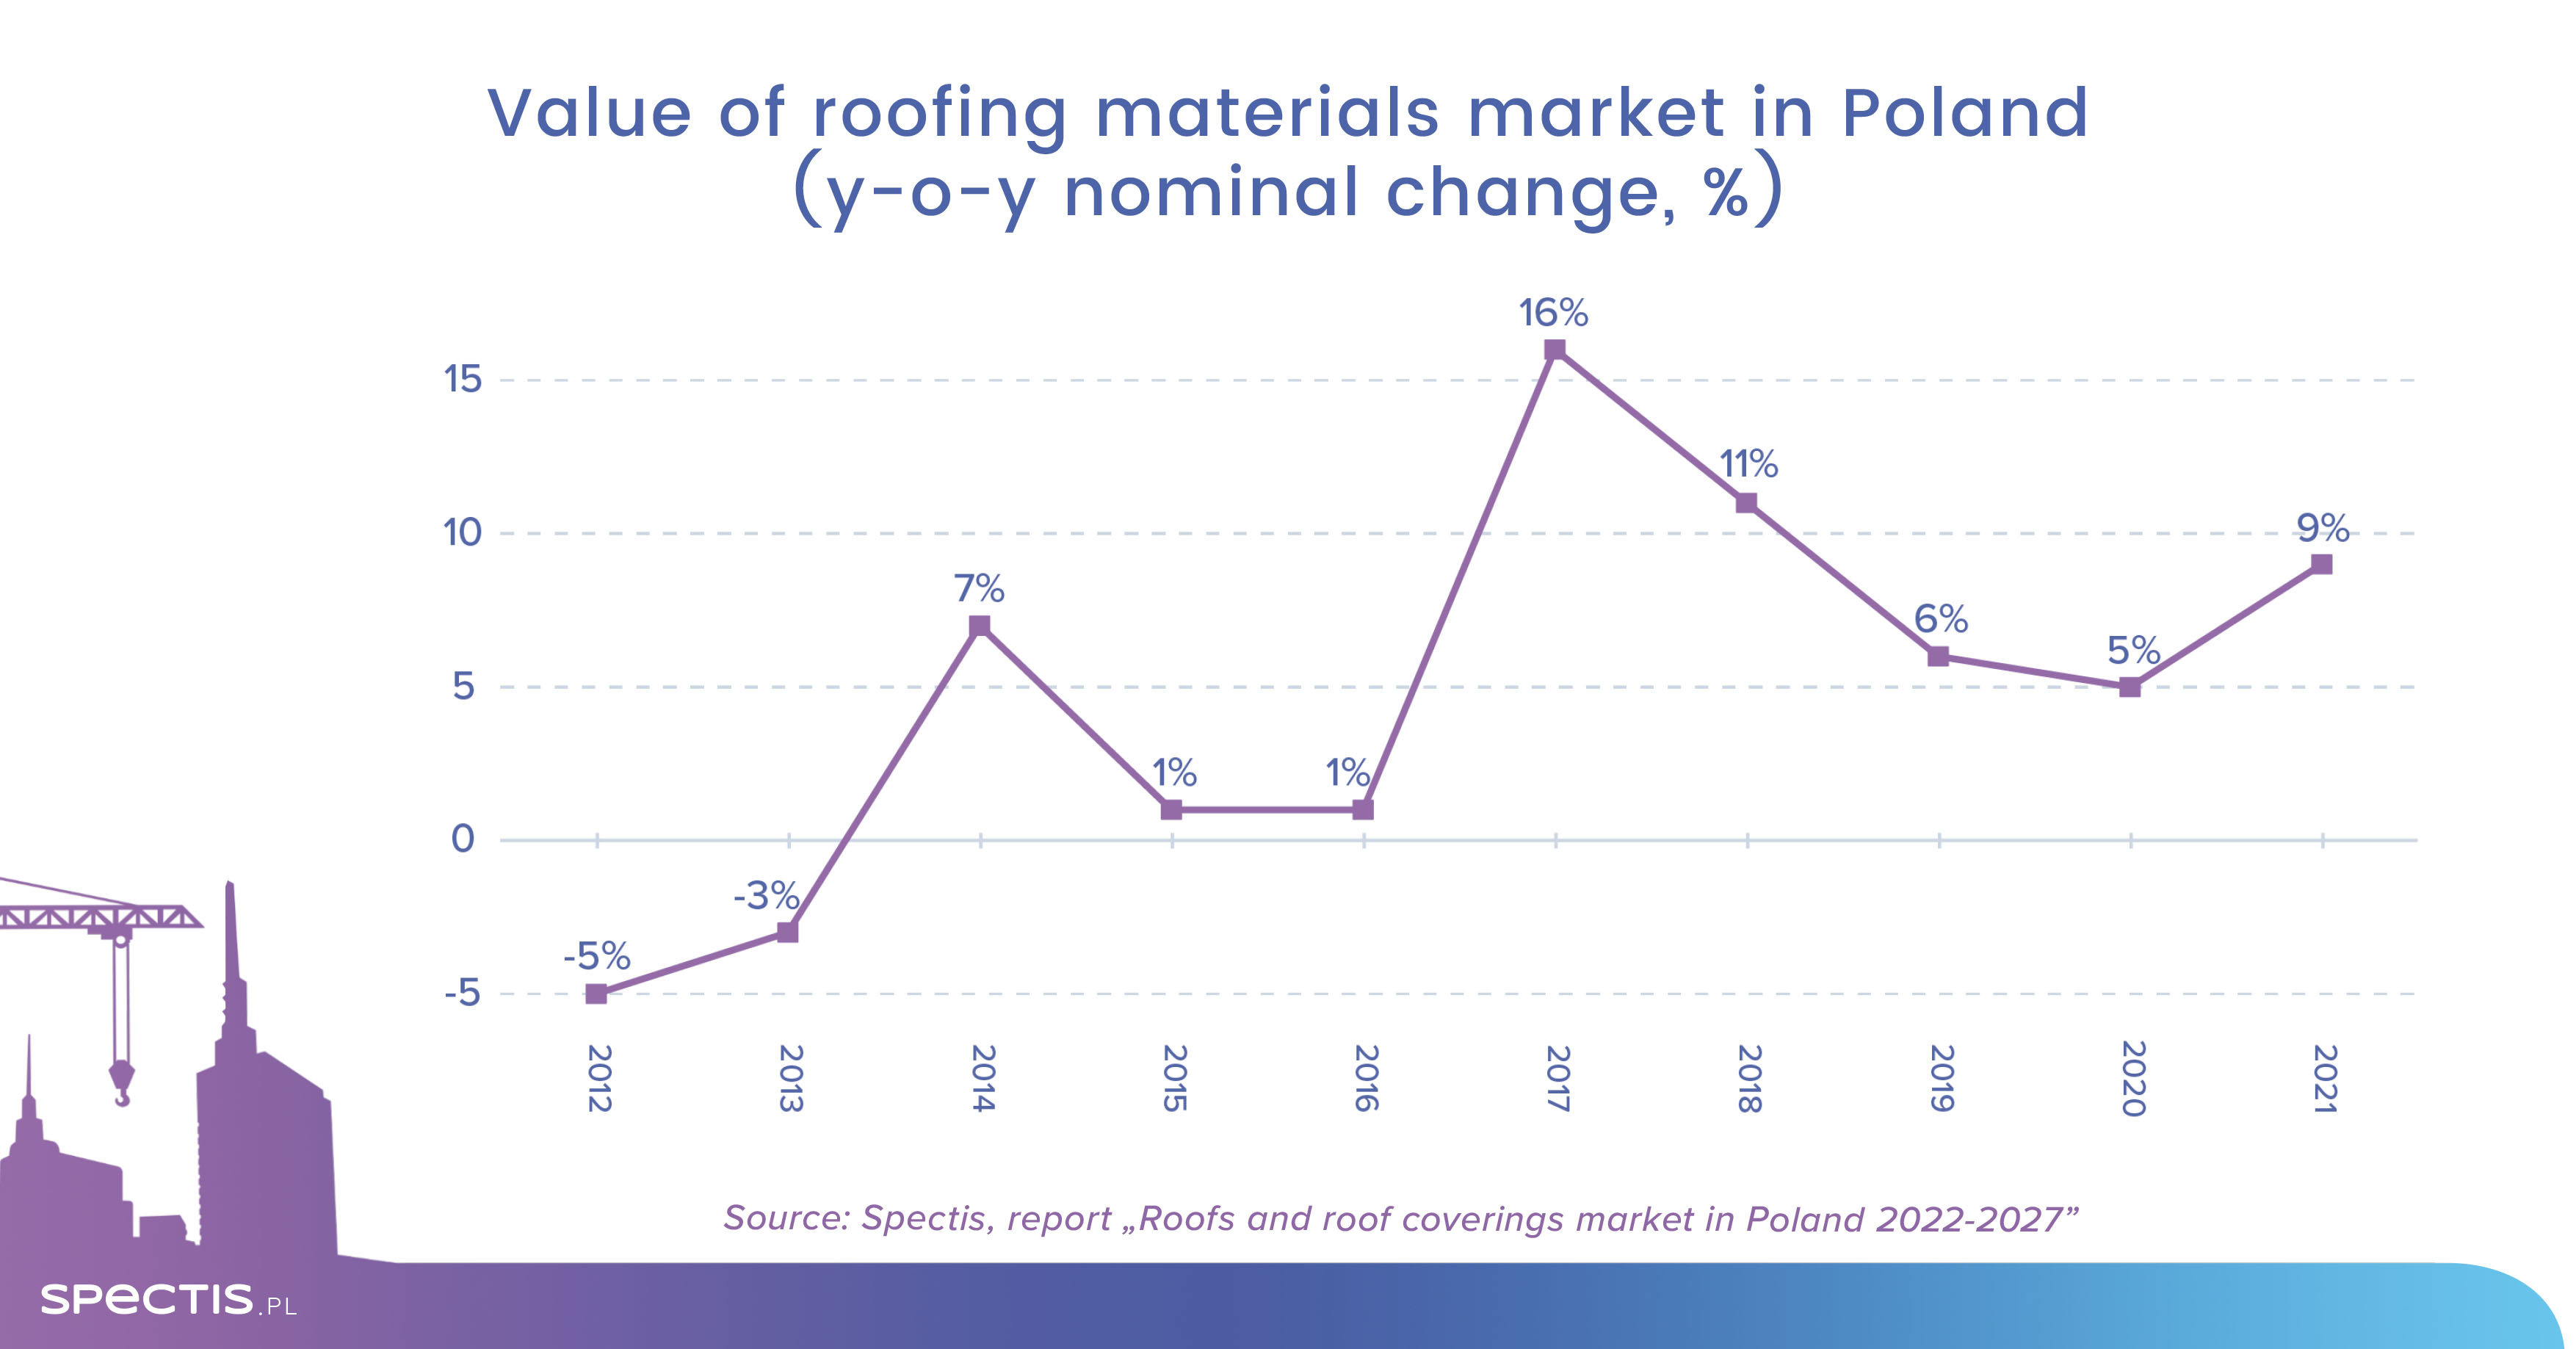 Soaring prices boost the value of the roofing materials market in Poland